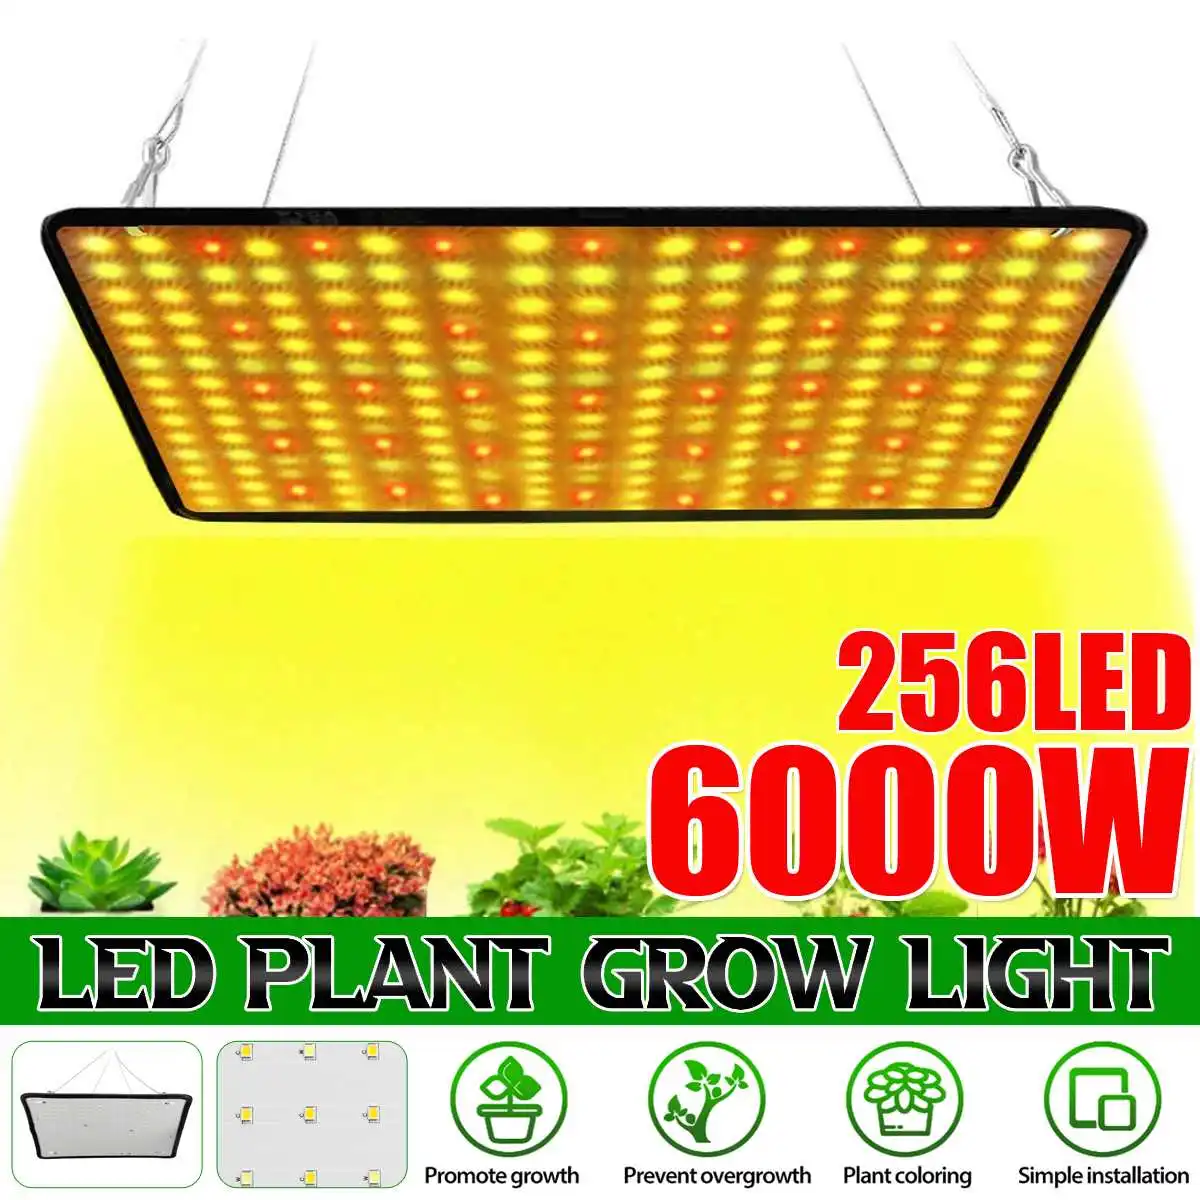 

6000W 256 LED Growth Lamp For Plants Led Grow Light Full Spectrum Phyto Lamp Fitolampy Indoor Herbs Light For Greenhouse Grow